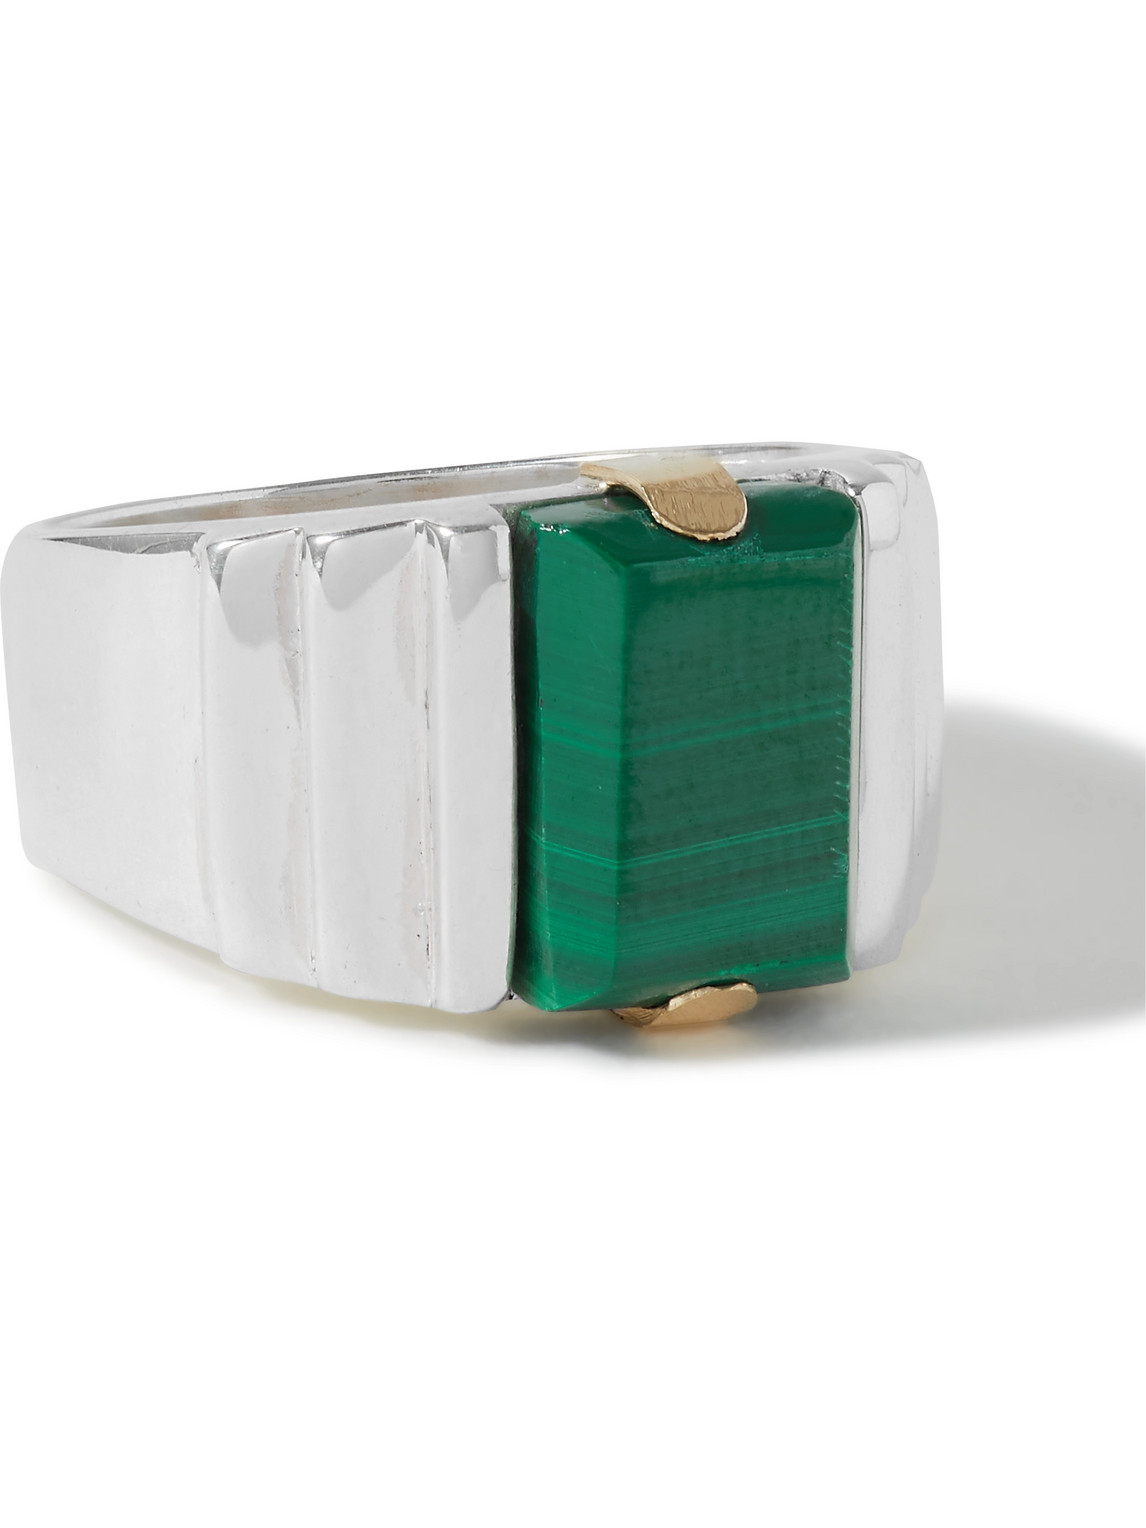 MAIDEN NAME THROWING FITS THE LARGE ARI STERLING SILVER MALACHITE RING